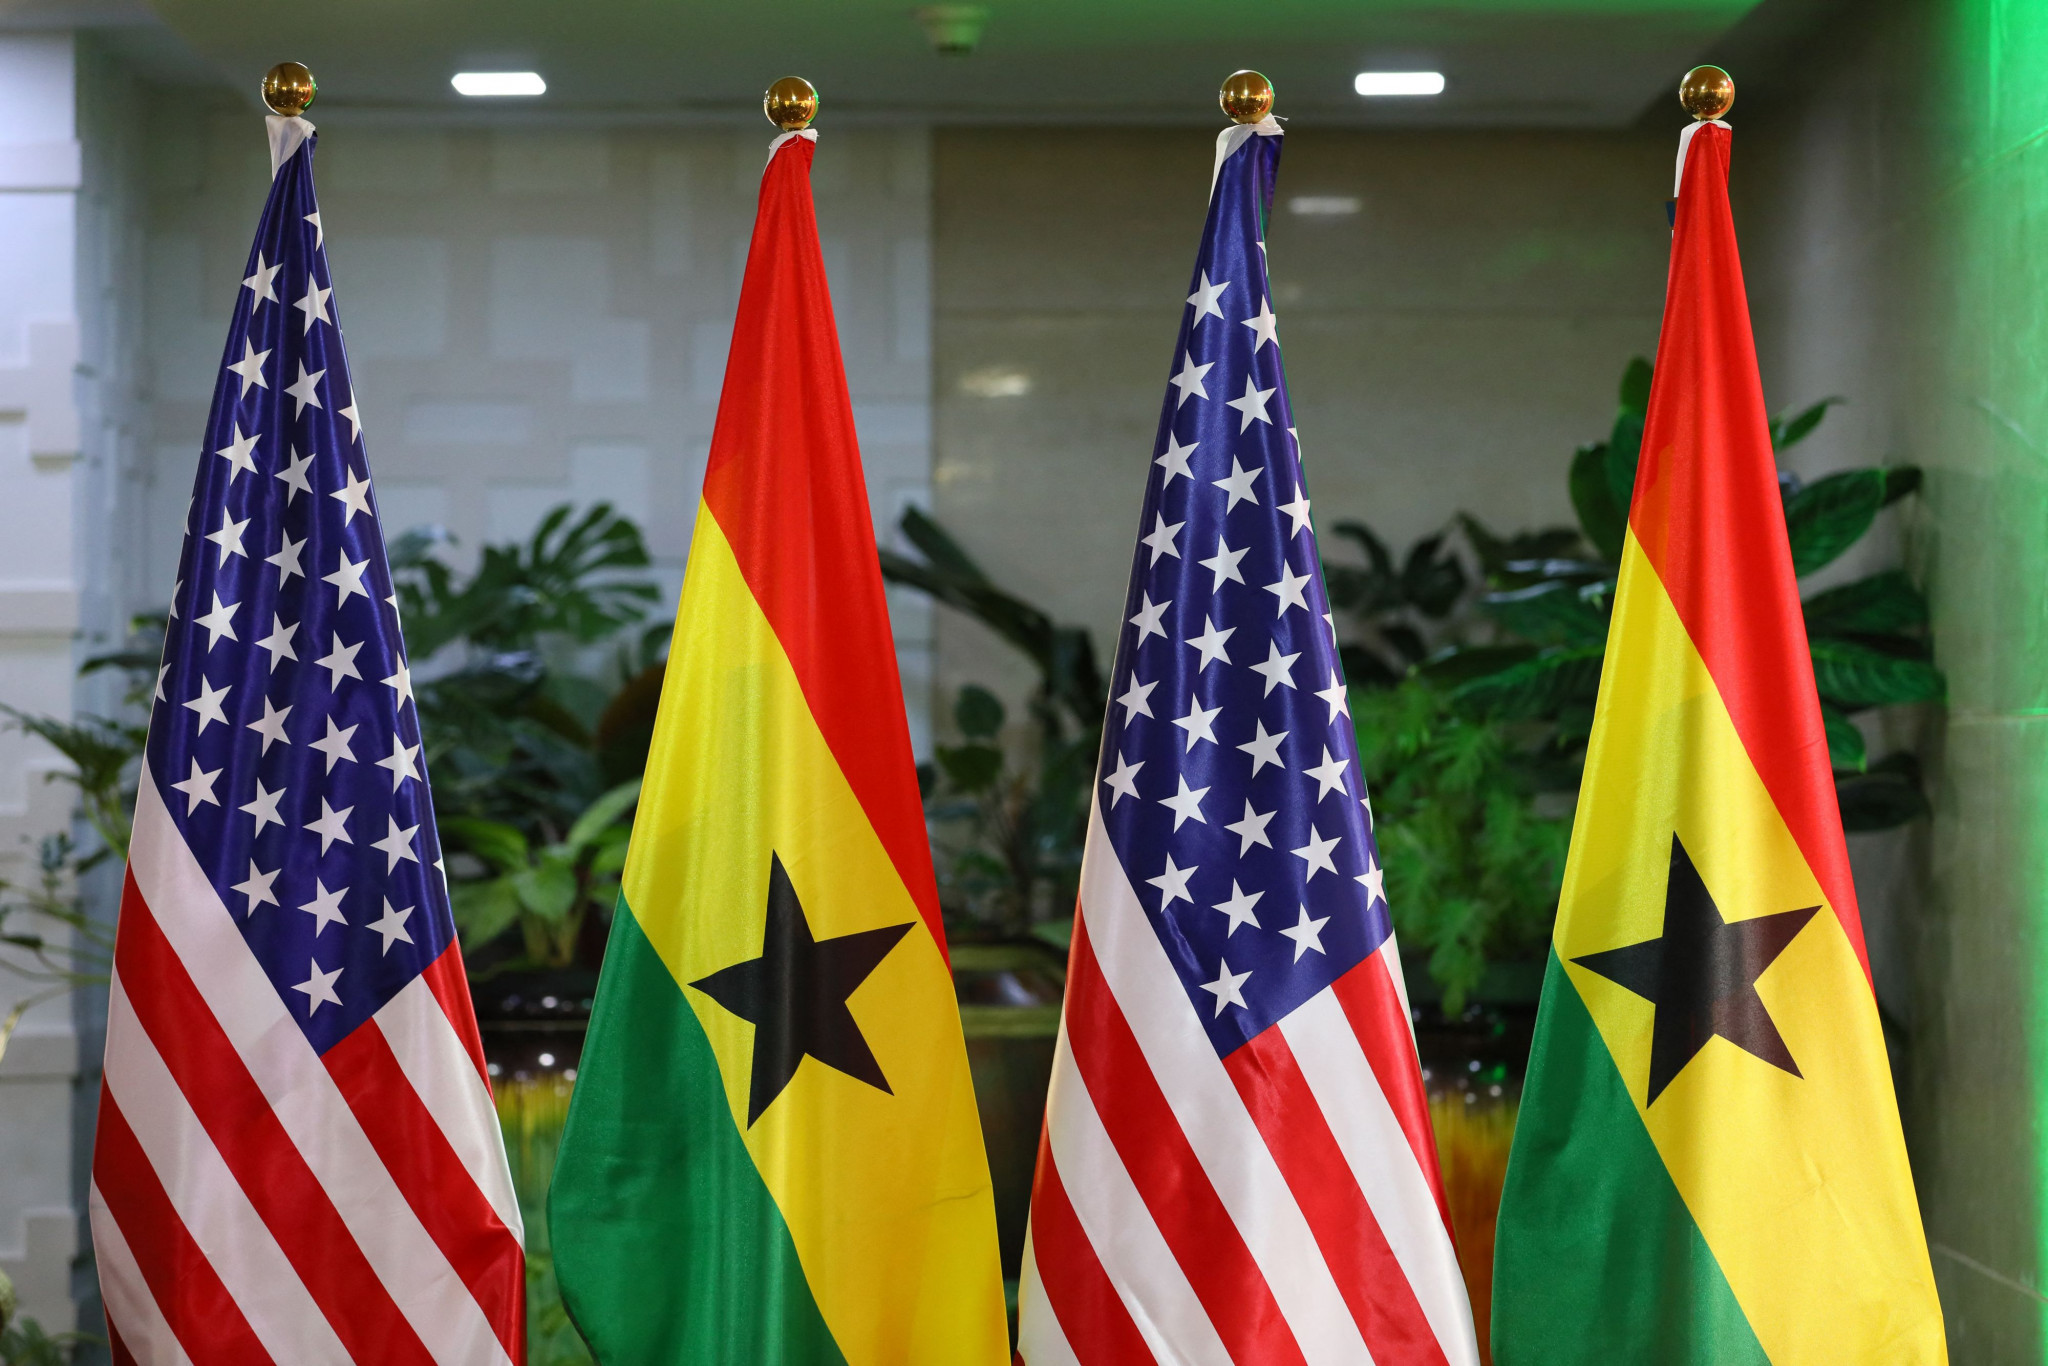 Accra 2023 chair visits Washington DC seeking to promote African Games